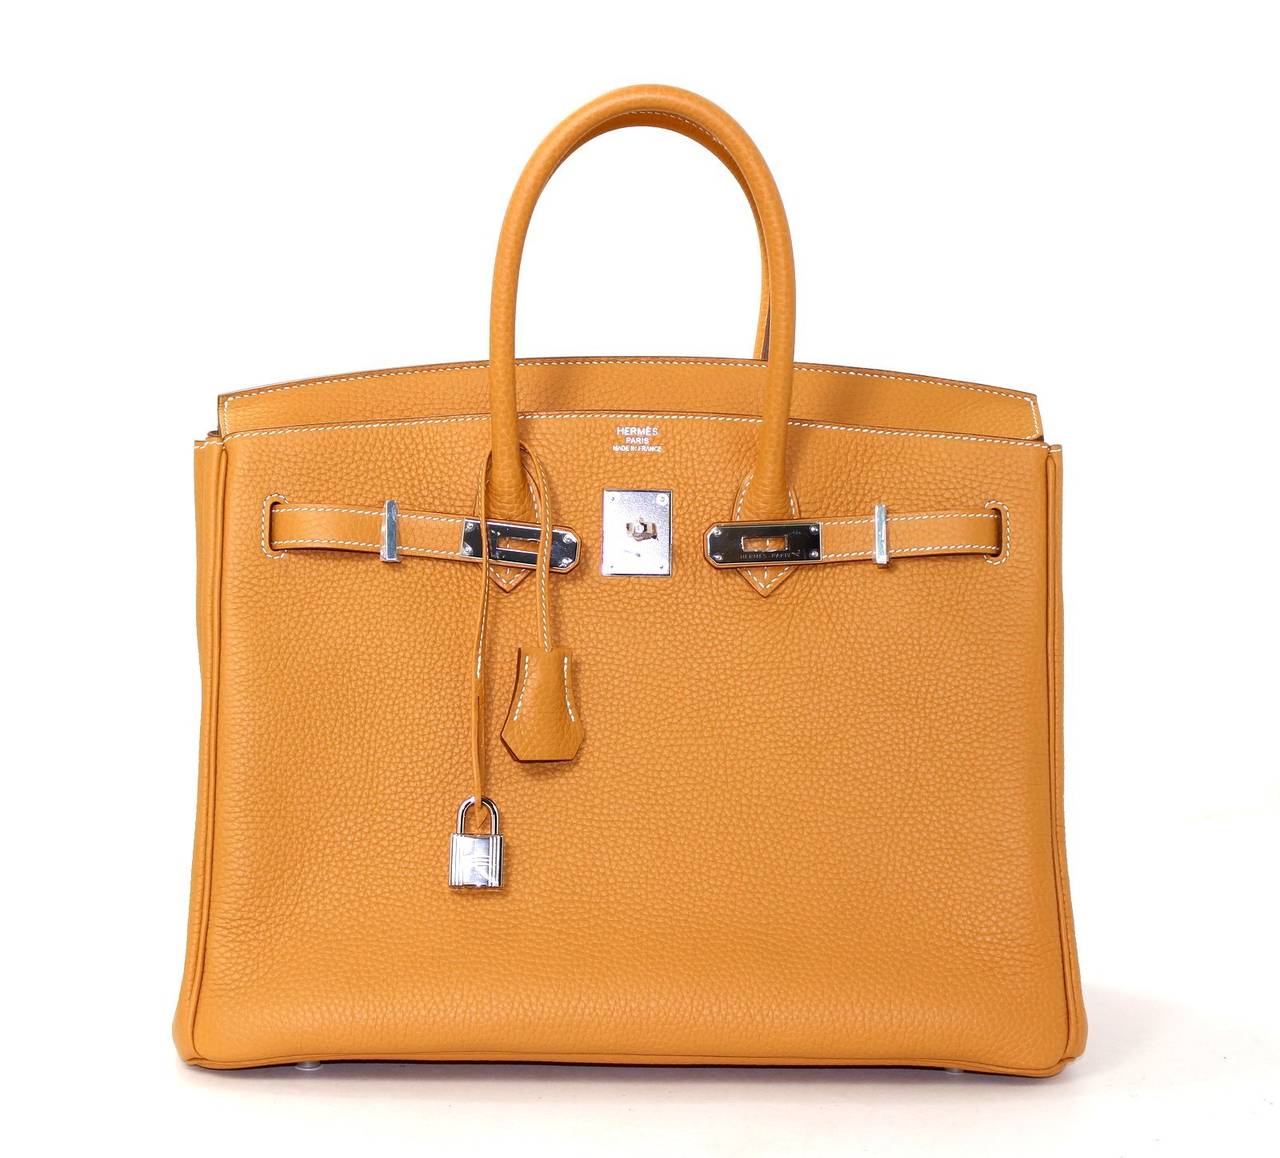 Hermes Fjord Leather Birkin Bag- 35 cm in Sable Brown with PHW For Sale 3